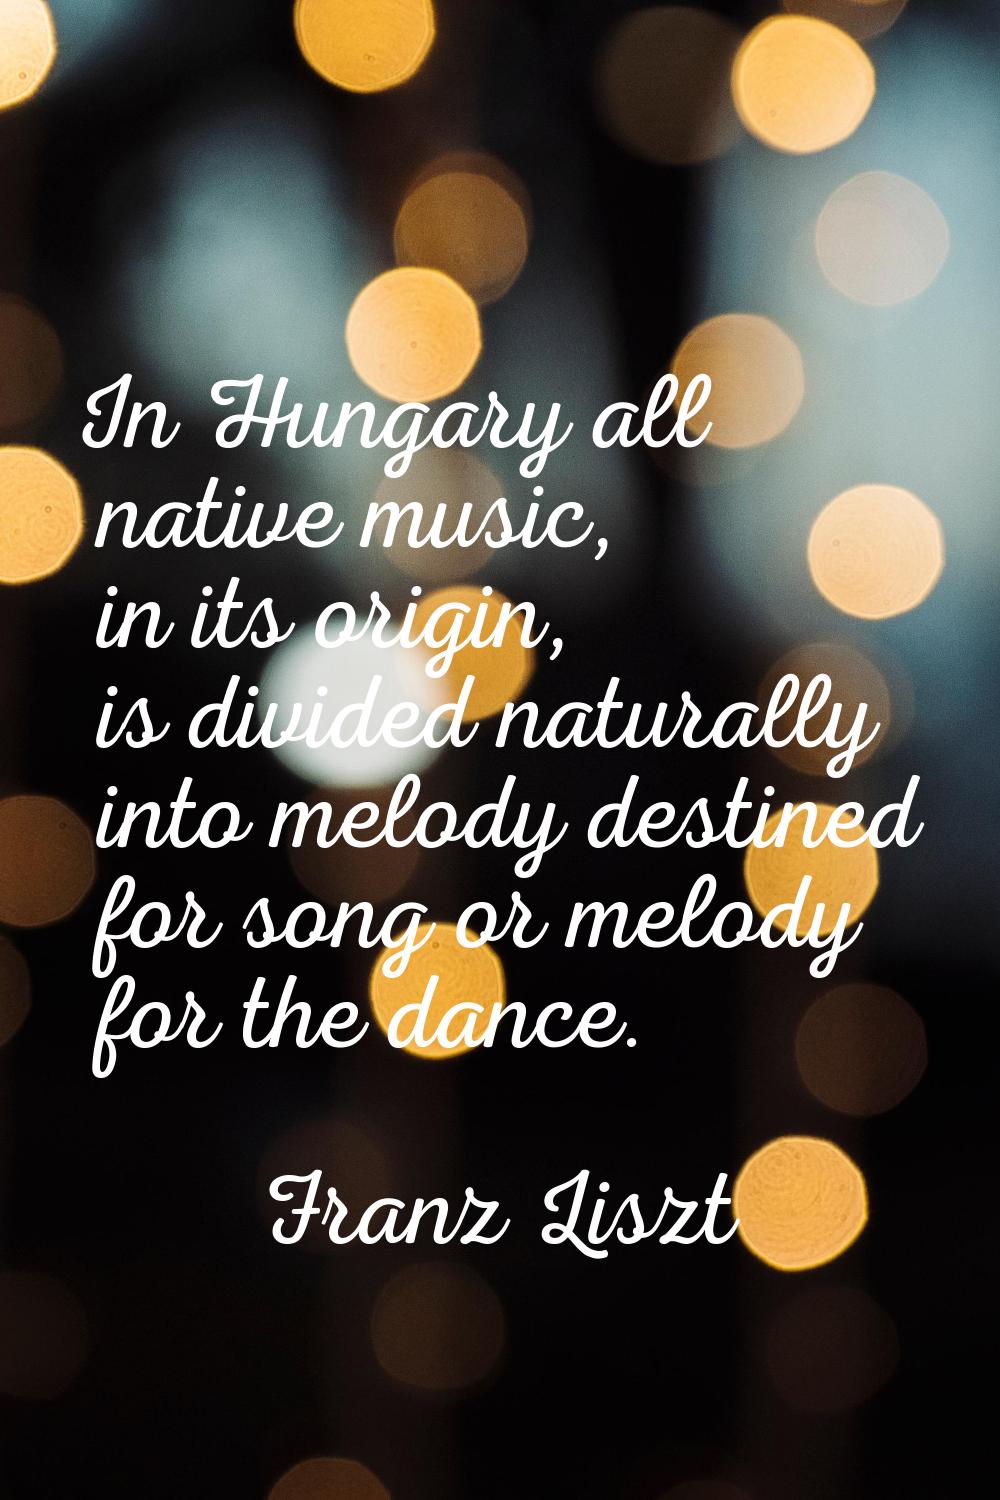 In Hungary all native music, in its origin, is divided naturally into melody destined for song or m